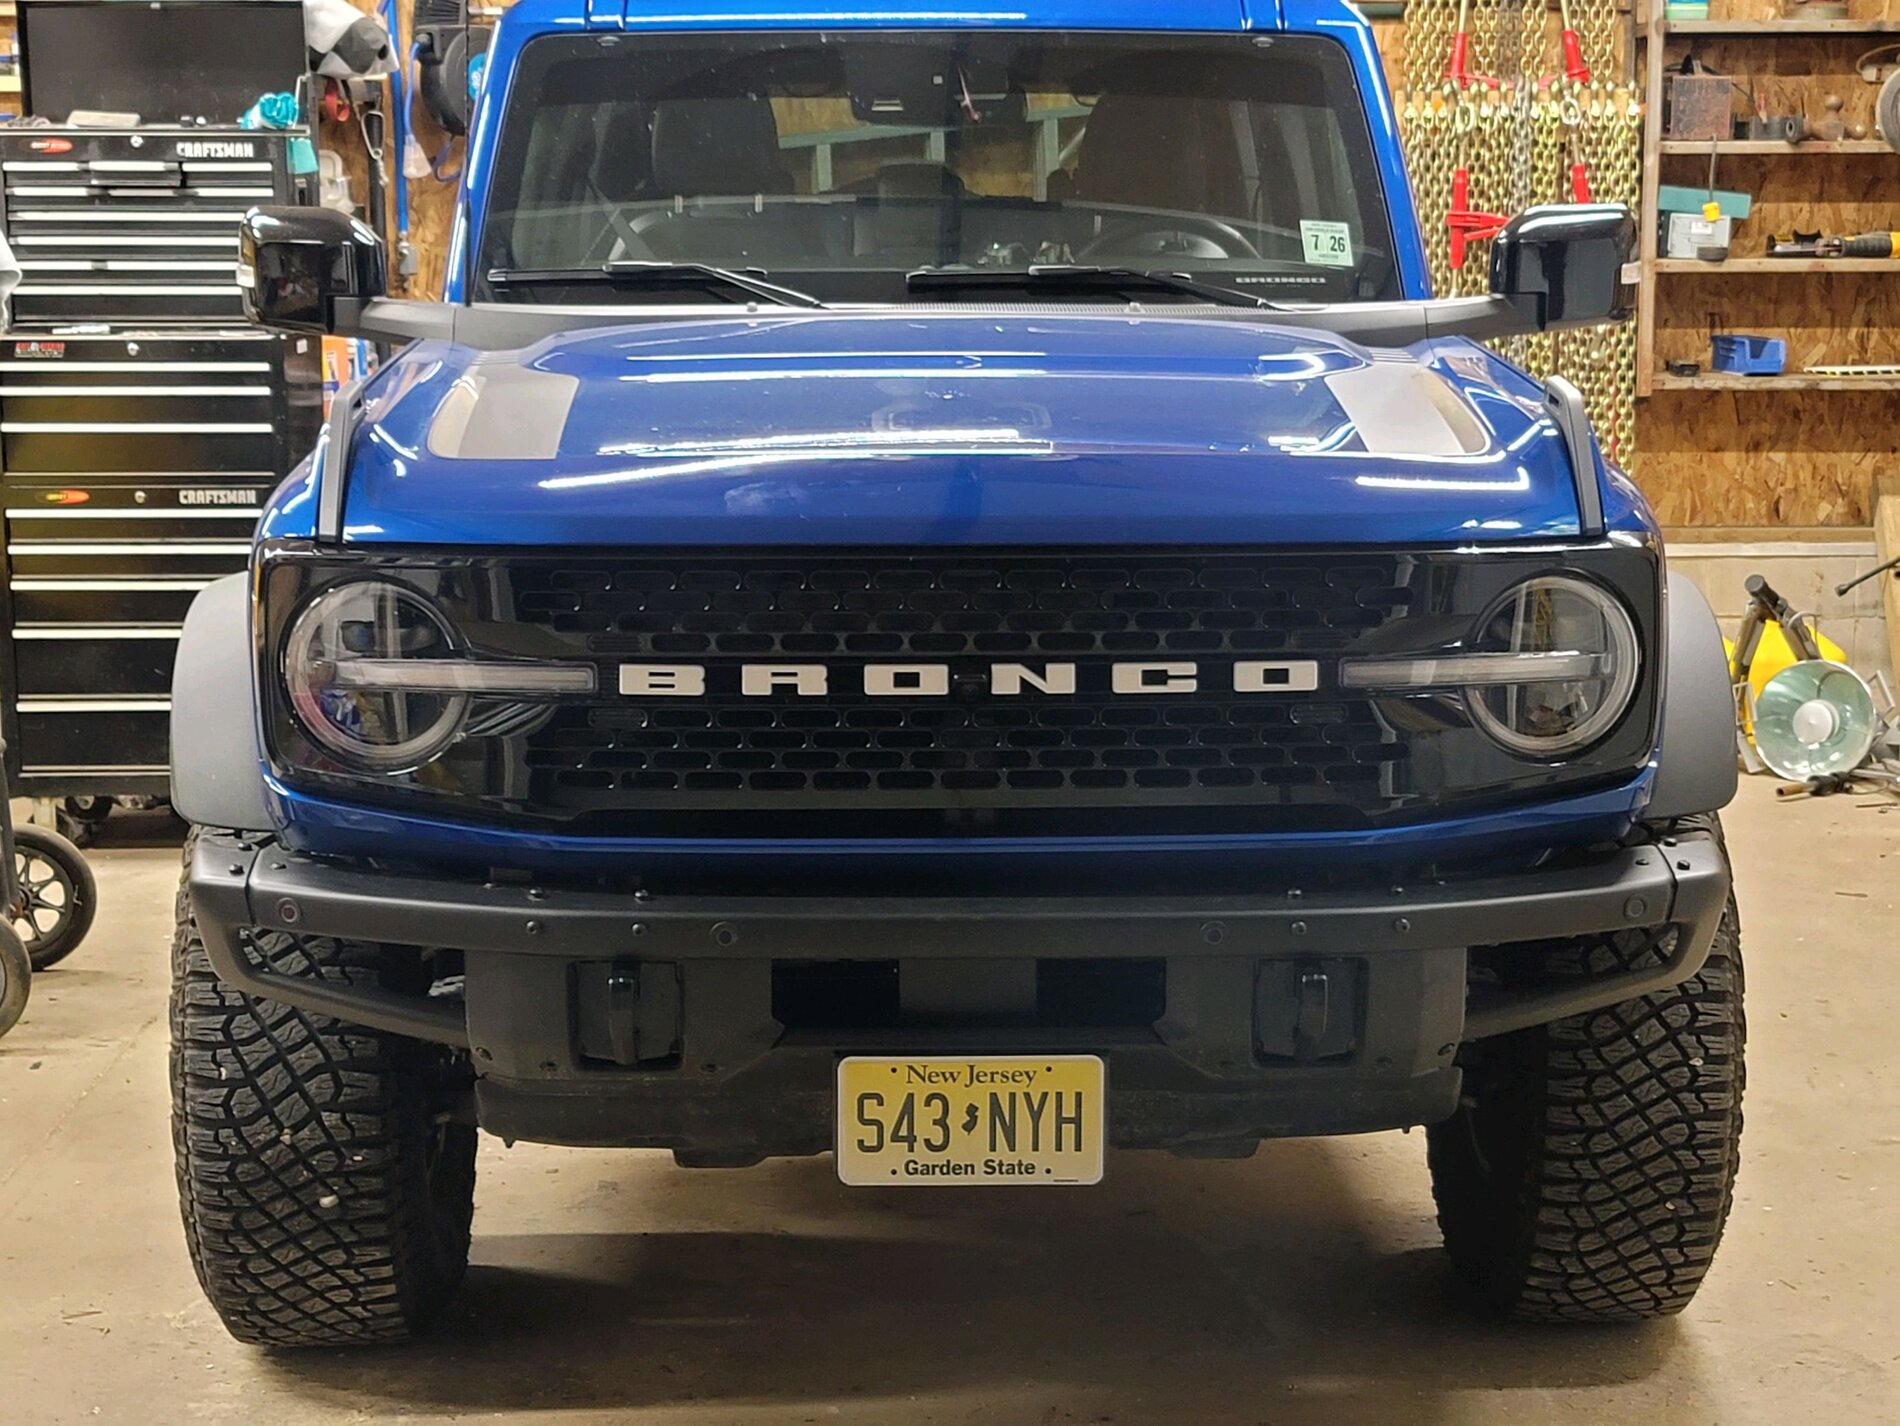 Ford Bronco PRICE DROP - Finally a Front License Plate bracket solution - order yours today vladimir-putin-laugh